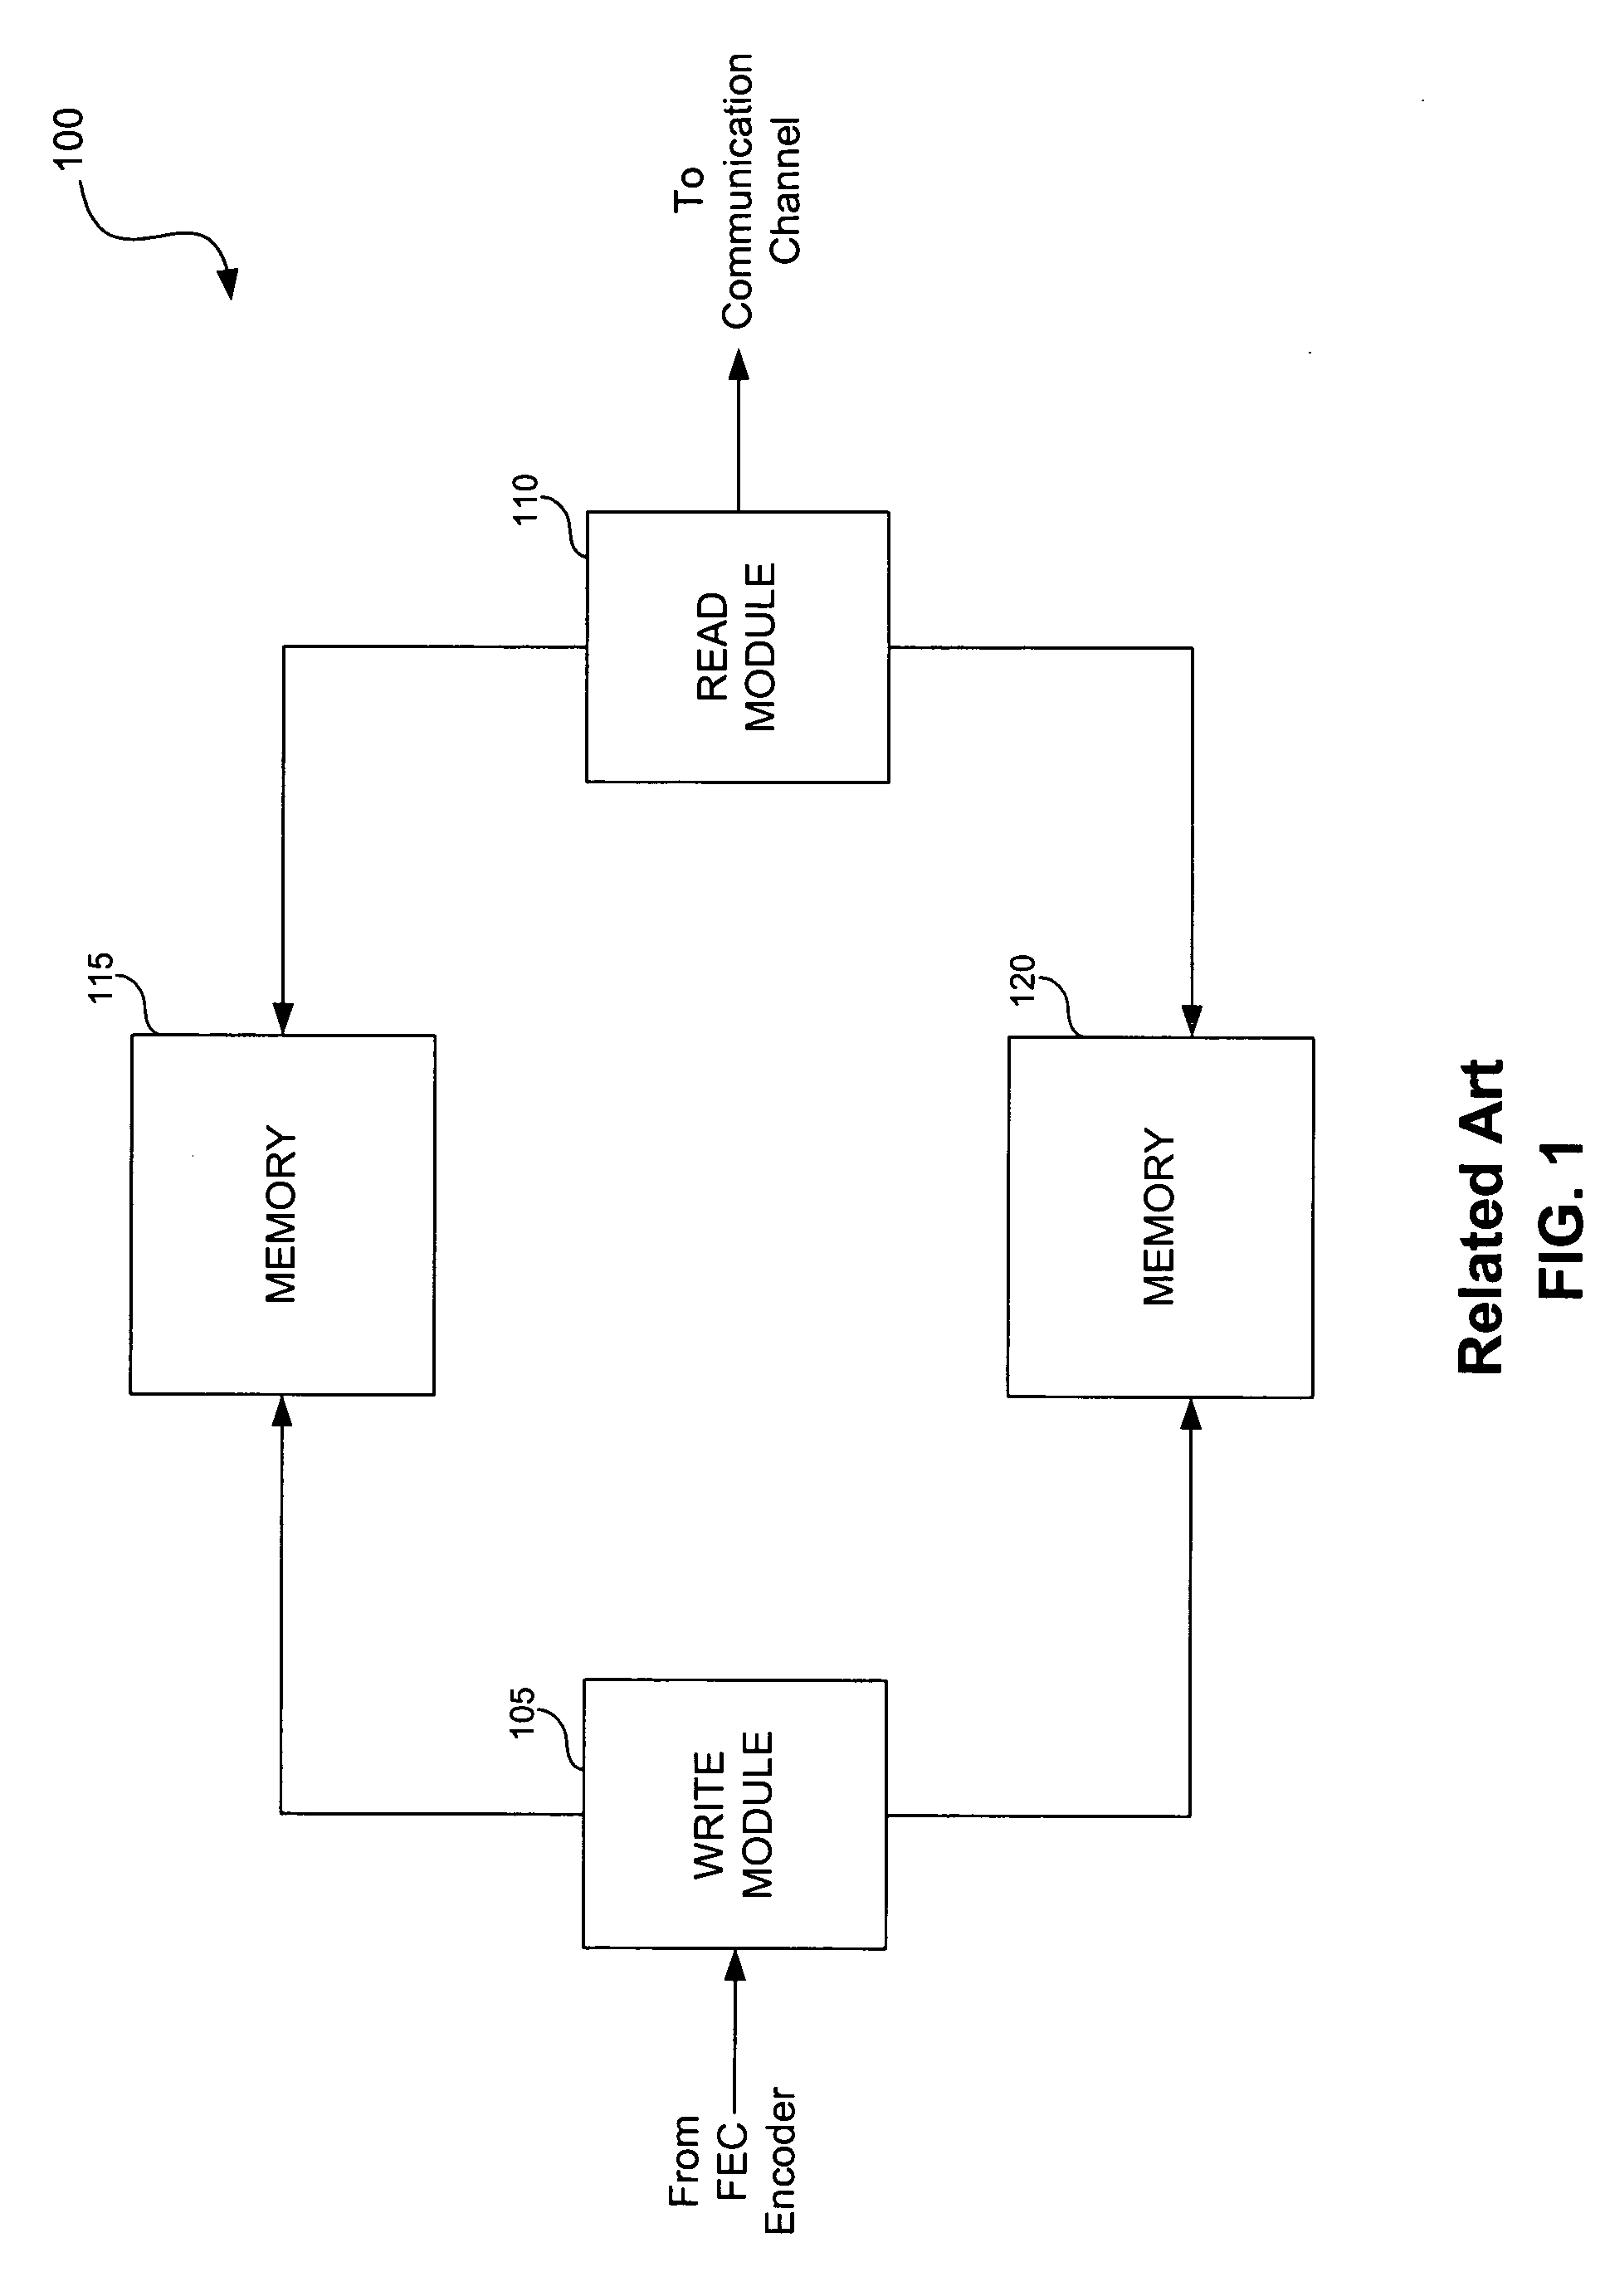 System and method for interleaving data in a communication device